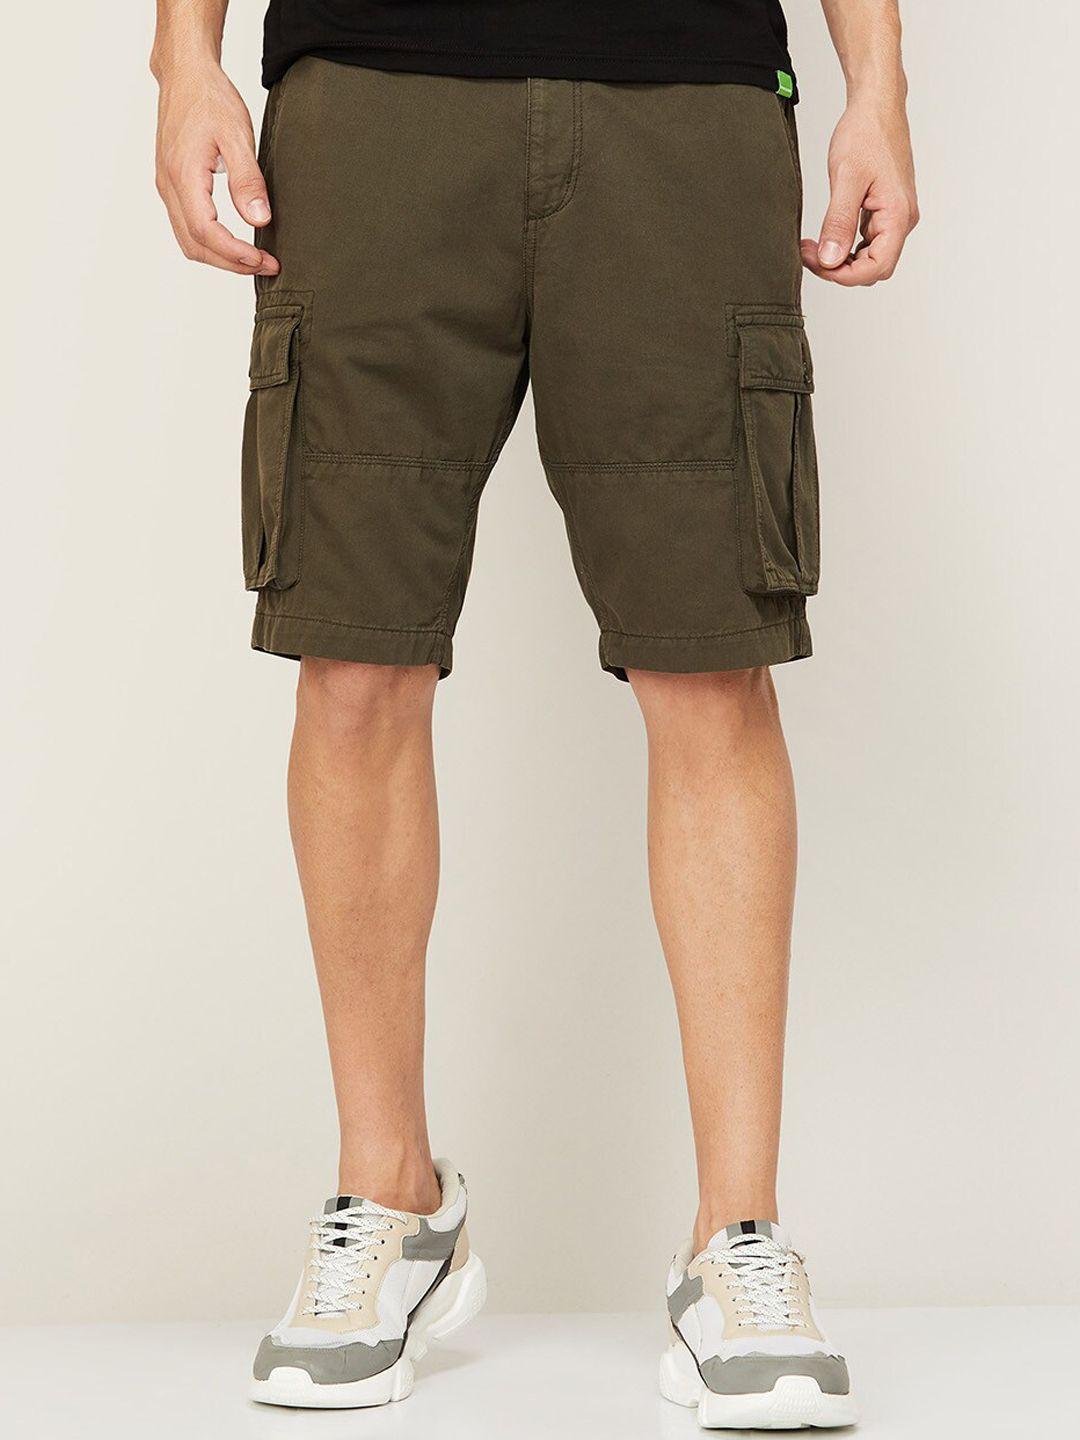 fame-forever-by-lifestyle-men-olive-green-cargo-shorts